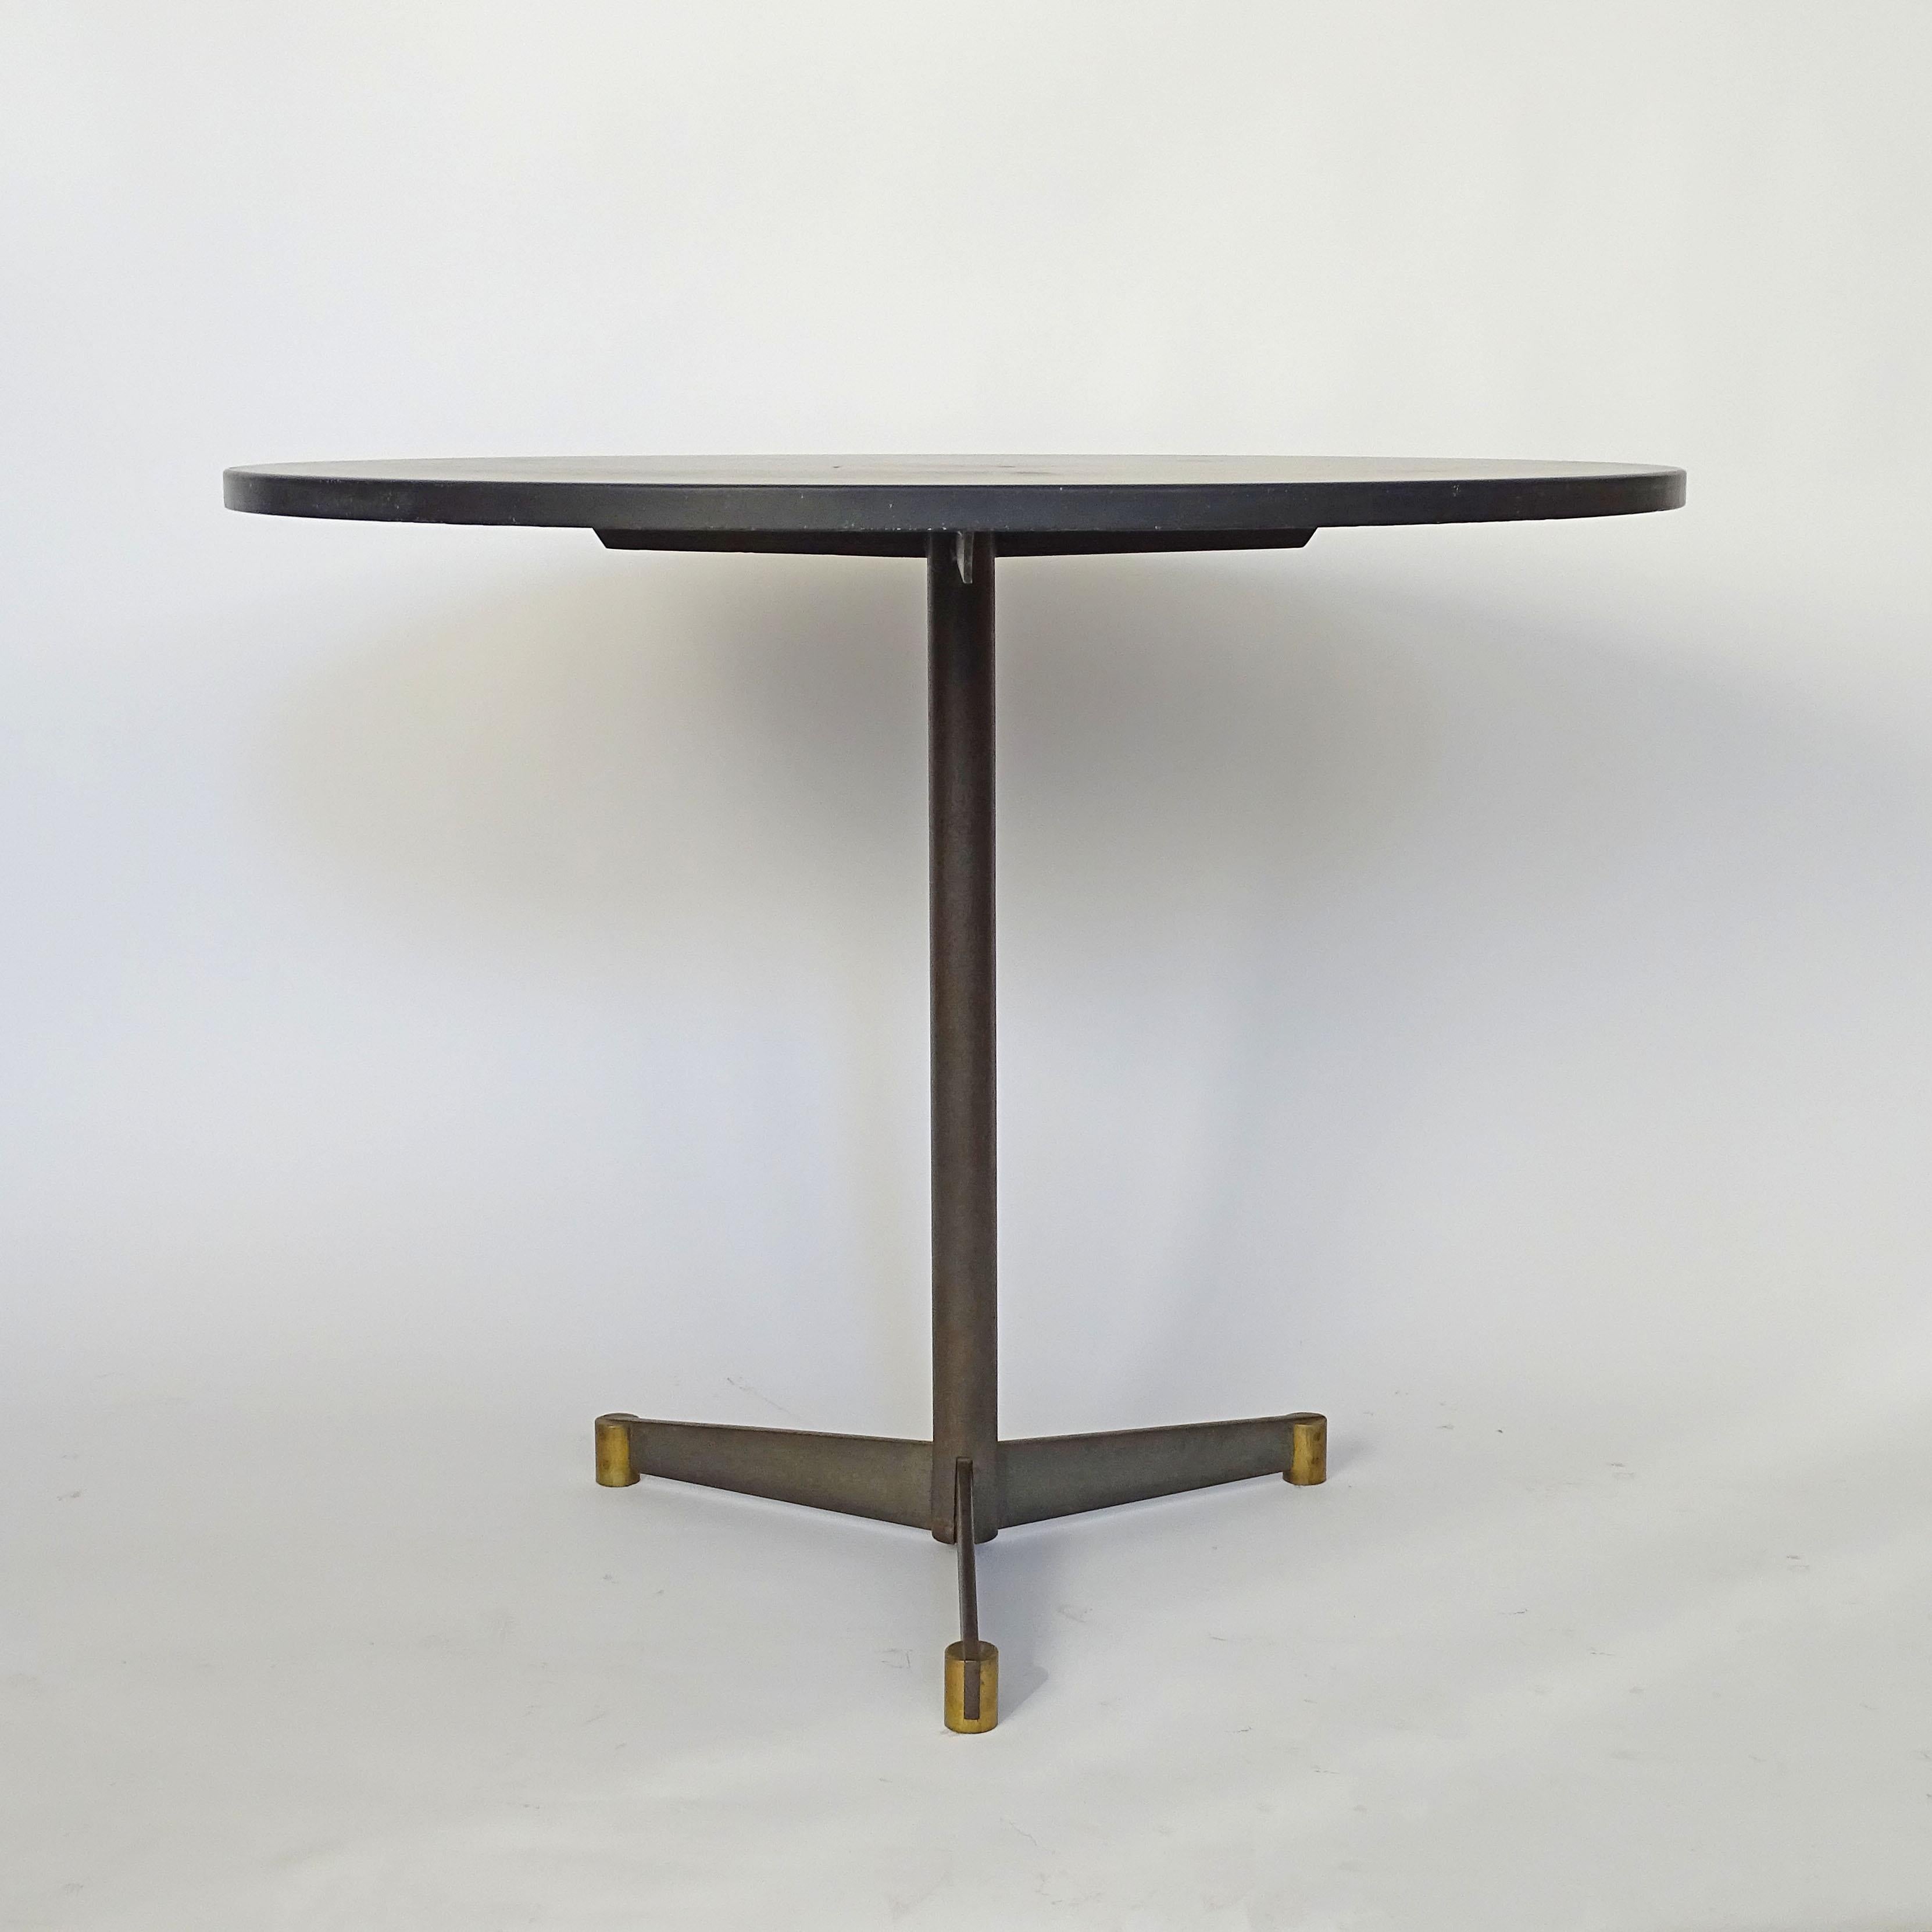 Italian Rationalist round dining table in Brass, Iron, and Slate 